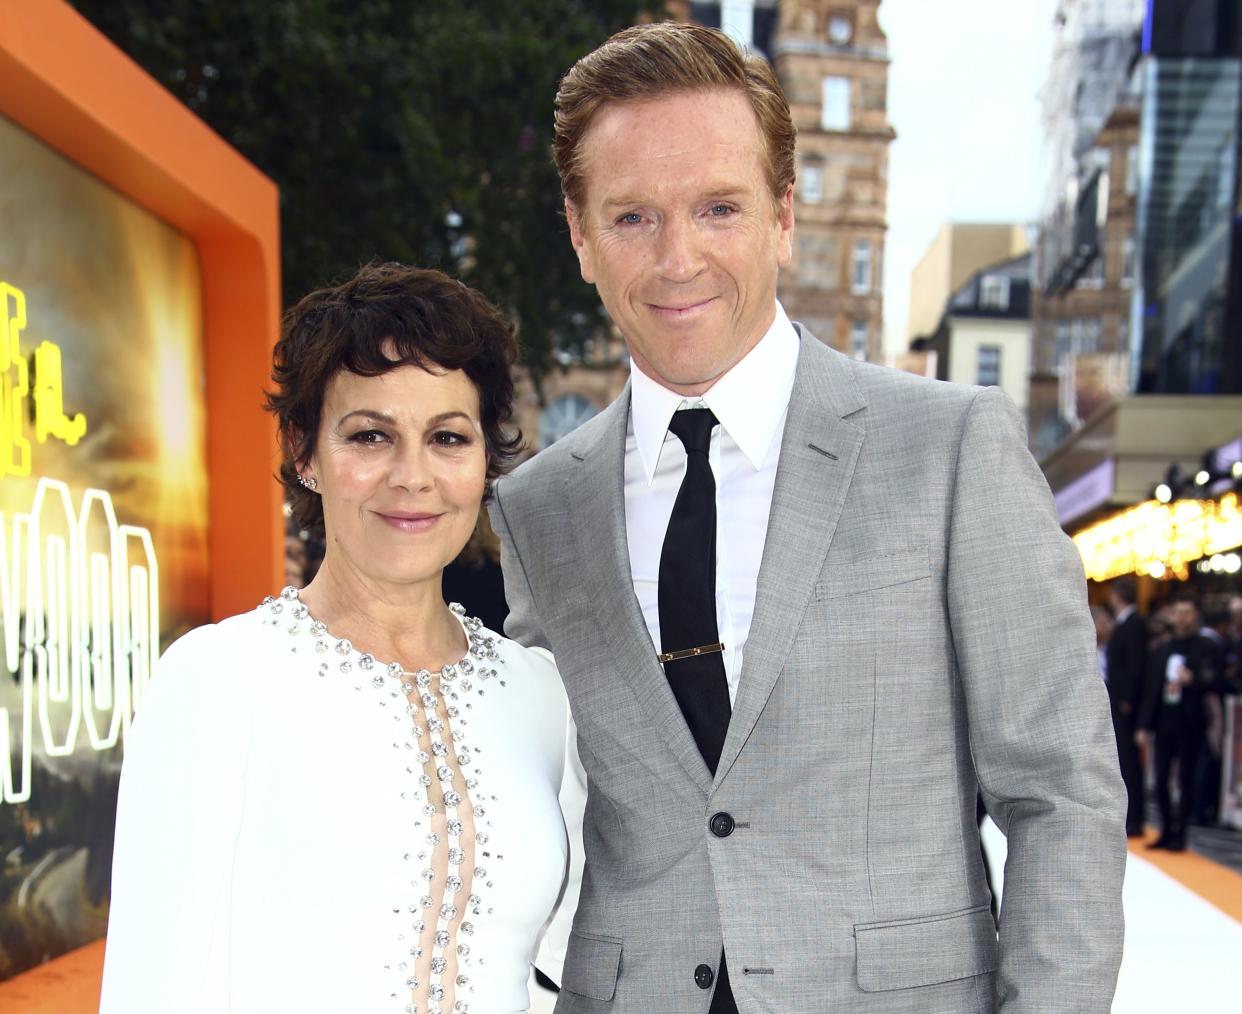 Actors Helen McCrory, left, and Damian Lewis pose for photographers upon arrival at the UK premiere for Once Upon A Time in Hollywood, at a central London cinema, Tuesday, July 30, 2019. 